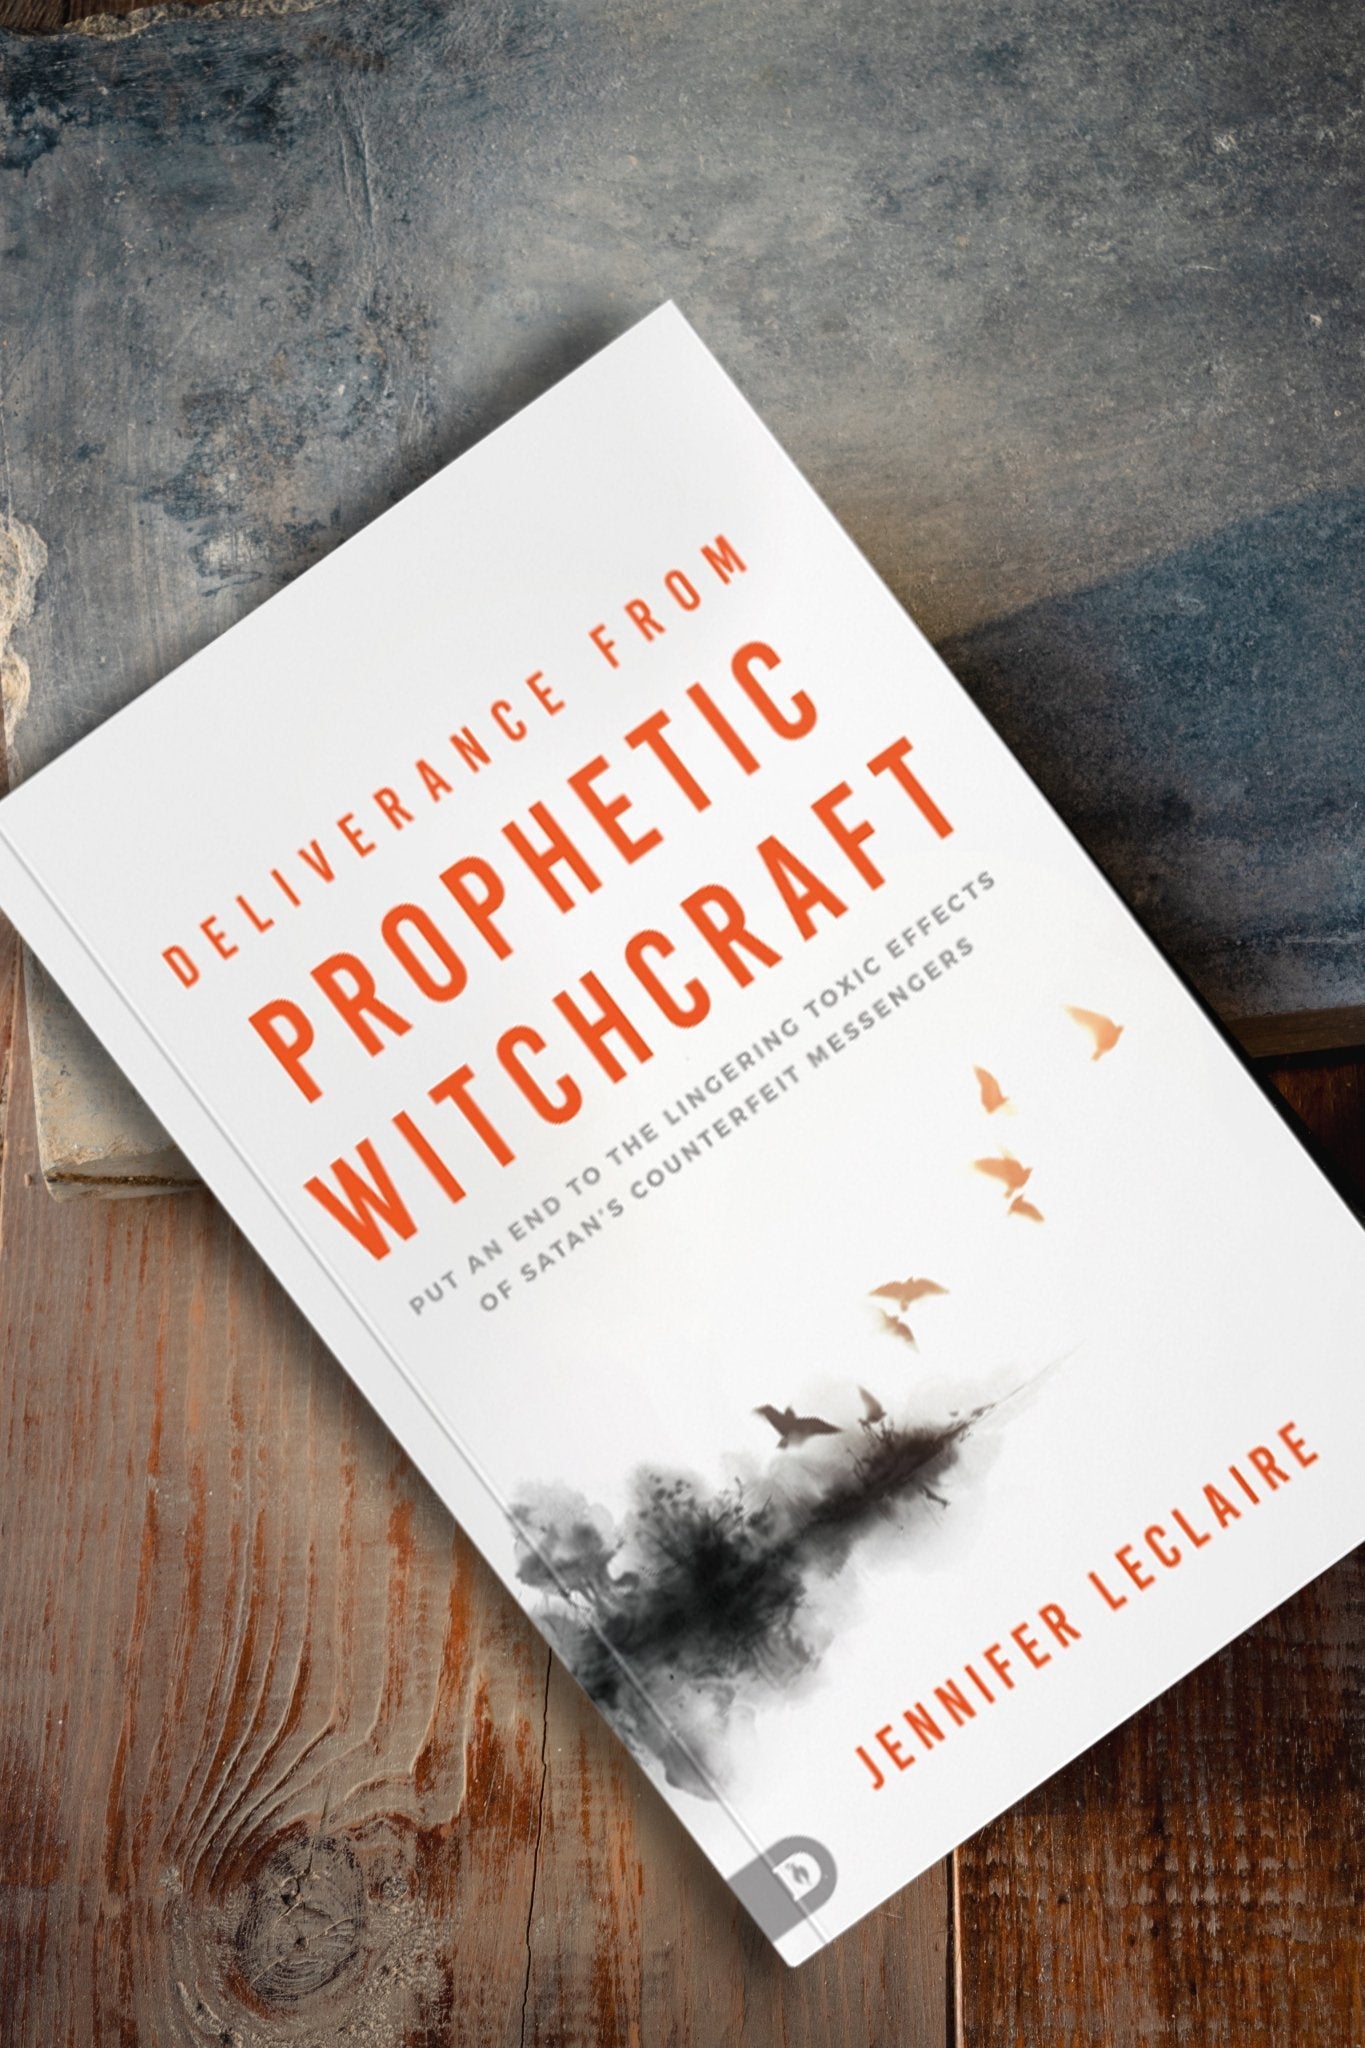 Deliverance from Prophetic Witchcraft: Put an End to the Lingering Toxic Effects of Satan's Counterfeit Messengers Paperback – September 5, 2023 - Faith & Flame - Books and Gifts - Destiny Image - 9780768472820